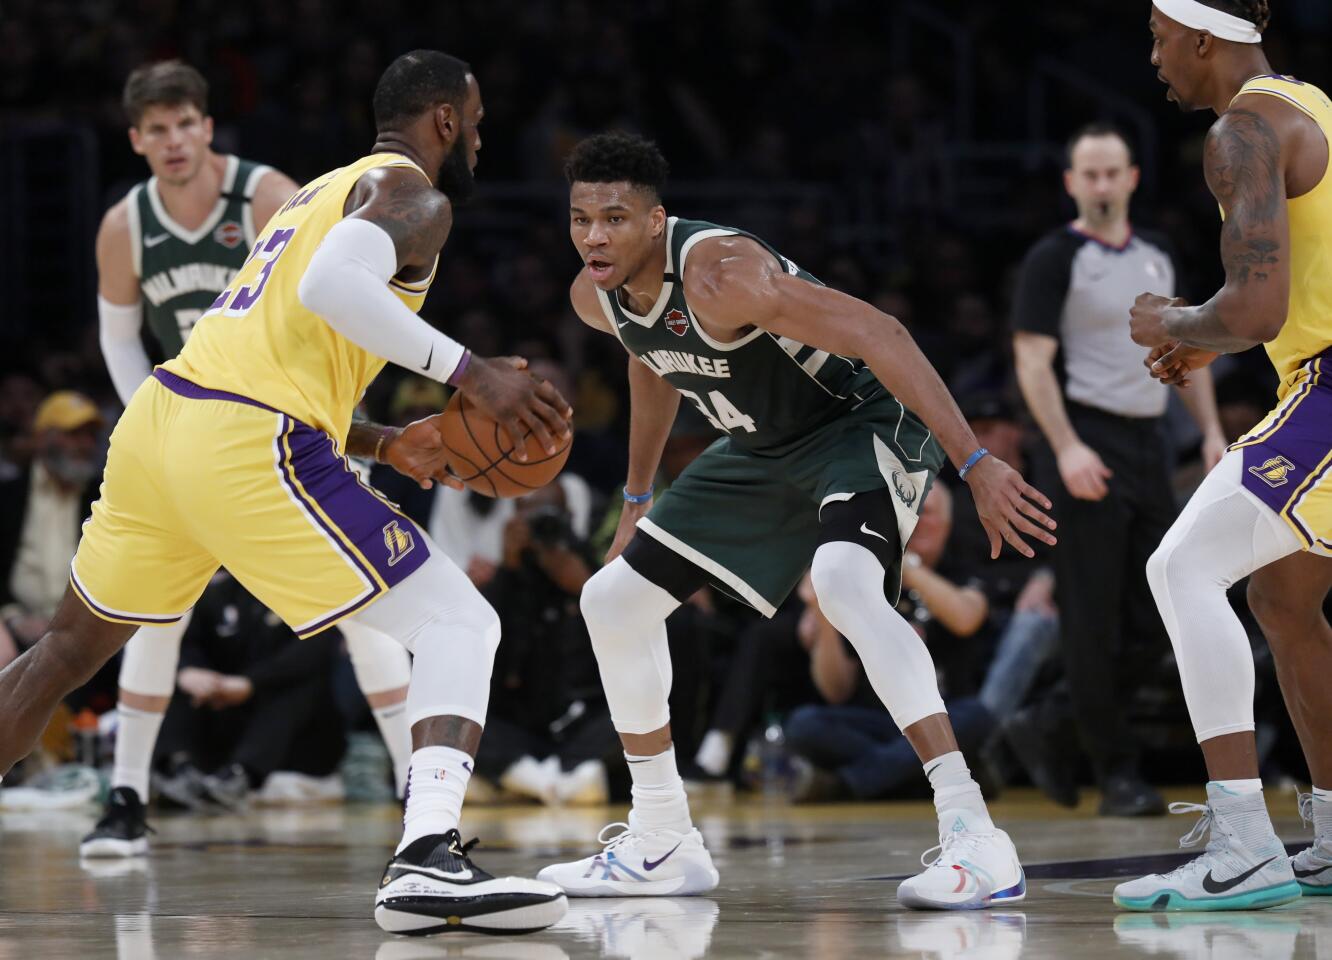 LeBron James is guarded by Bucks forward Giannis Antetokounmpo during the first half of a game March 6 at Staples Center.